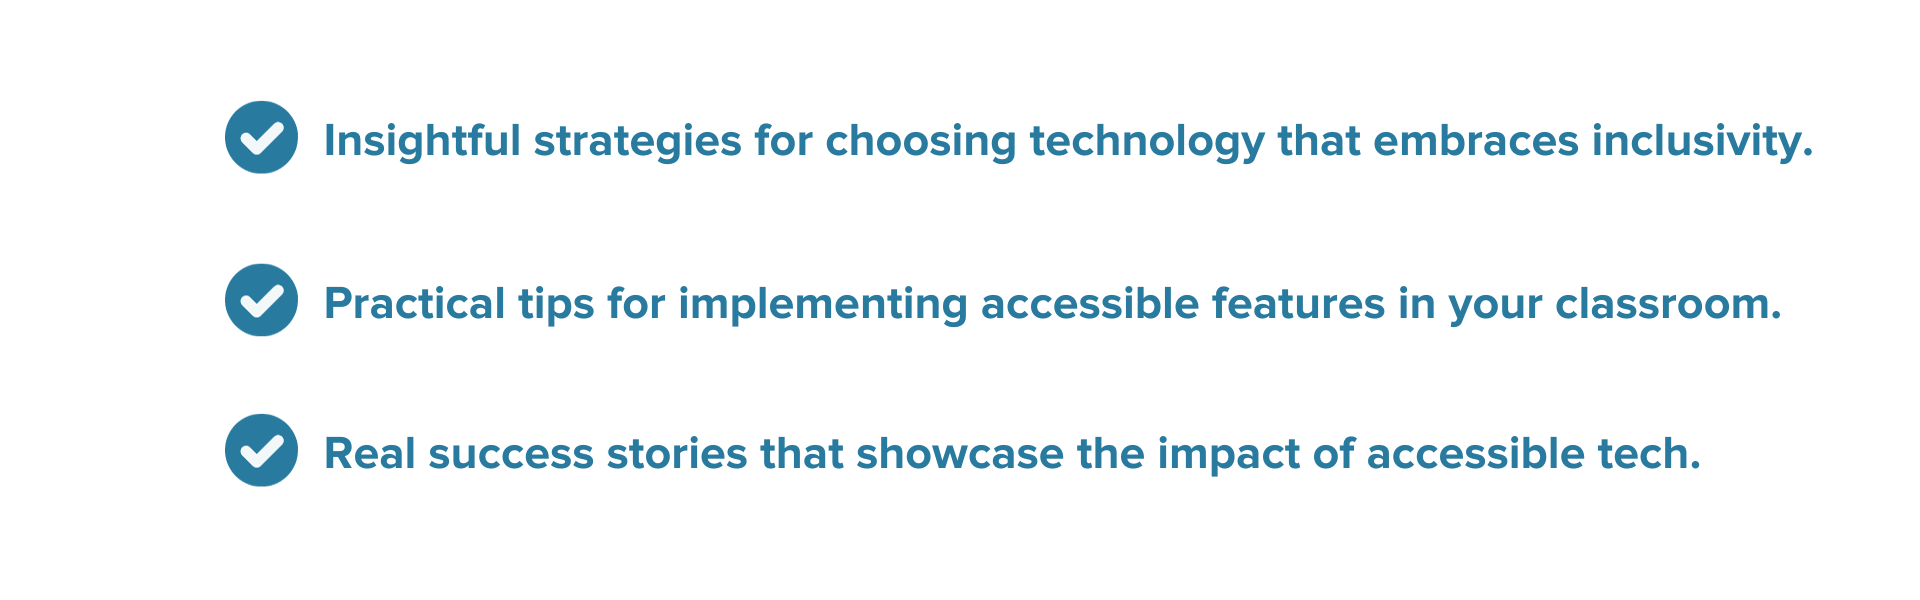 Insightful strategies for choosing technology that embraces inclusivity.Practical tips for implementing accessible features in your classroom.Real success stories that showcase the impact of accessible tech.